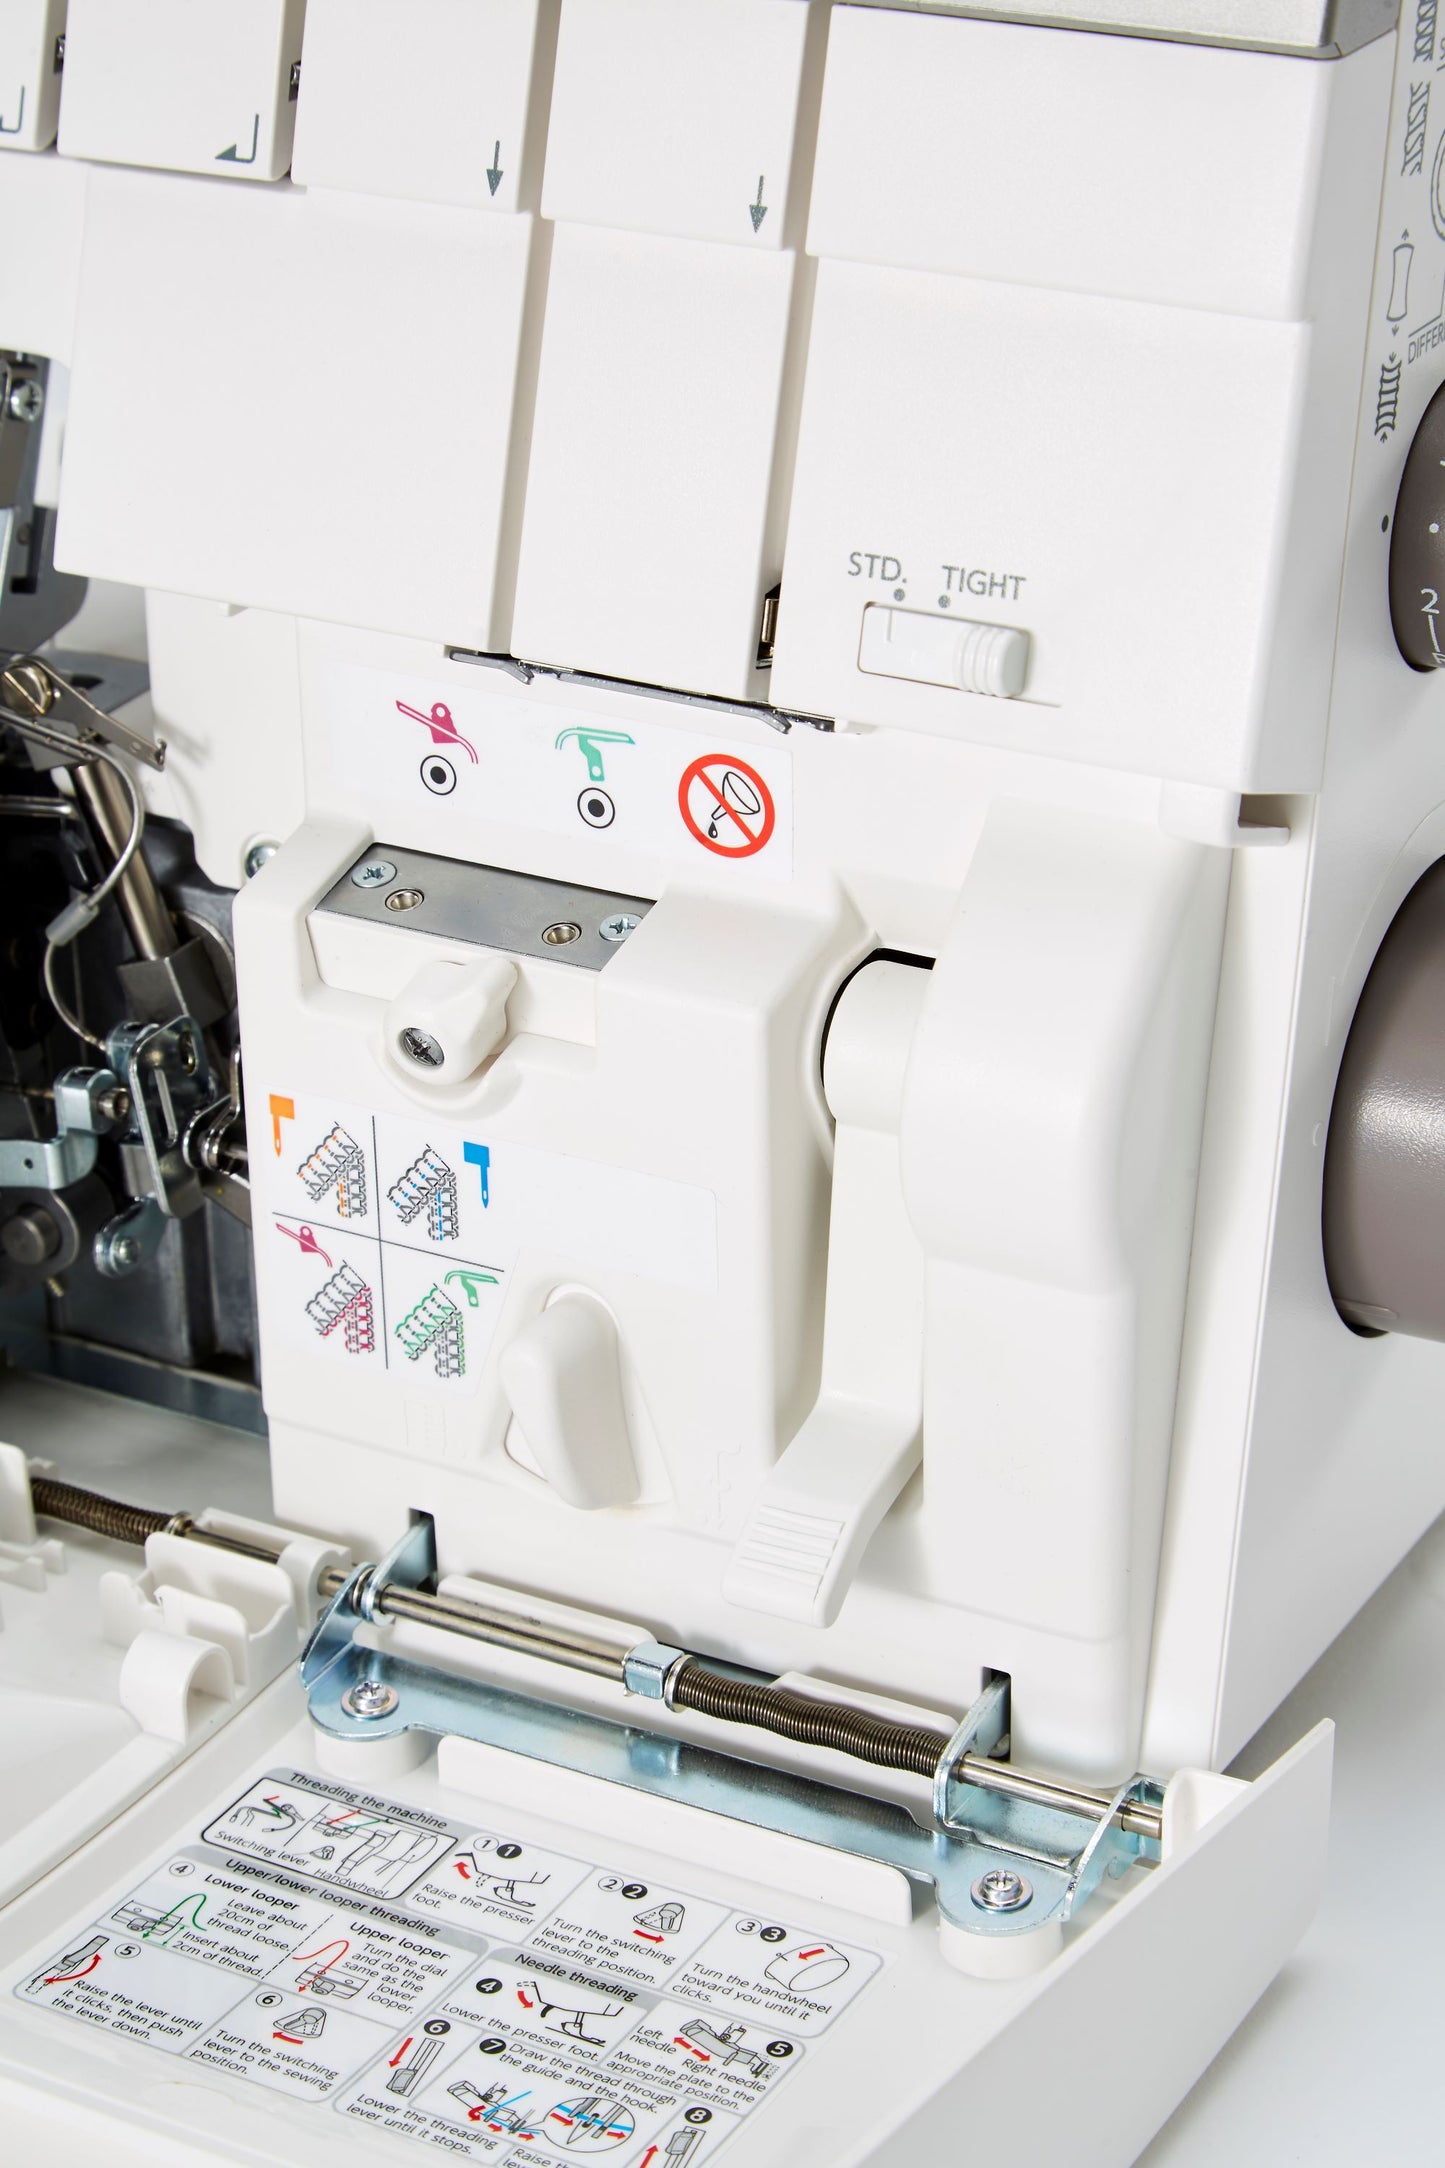 Janome AT2000D Professional Overlocker OFFER